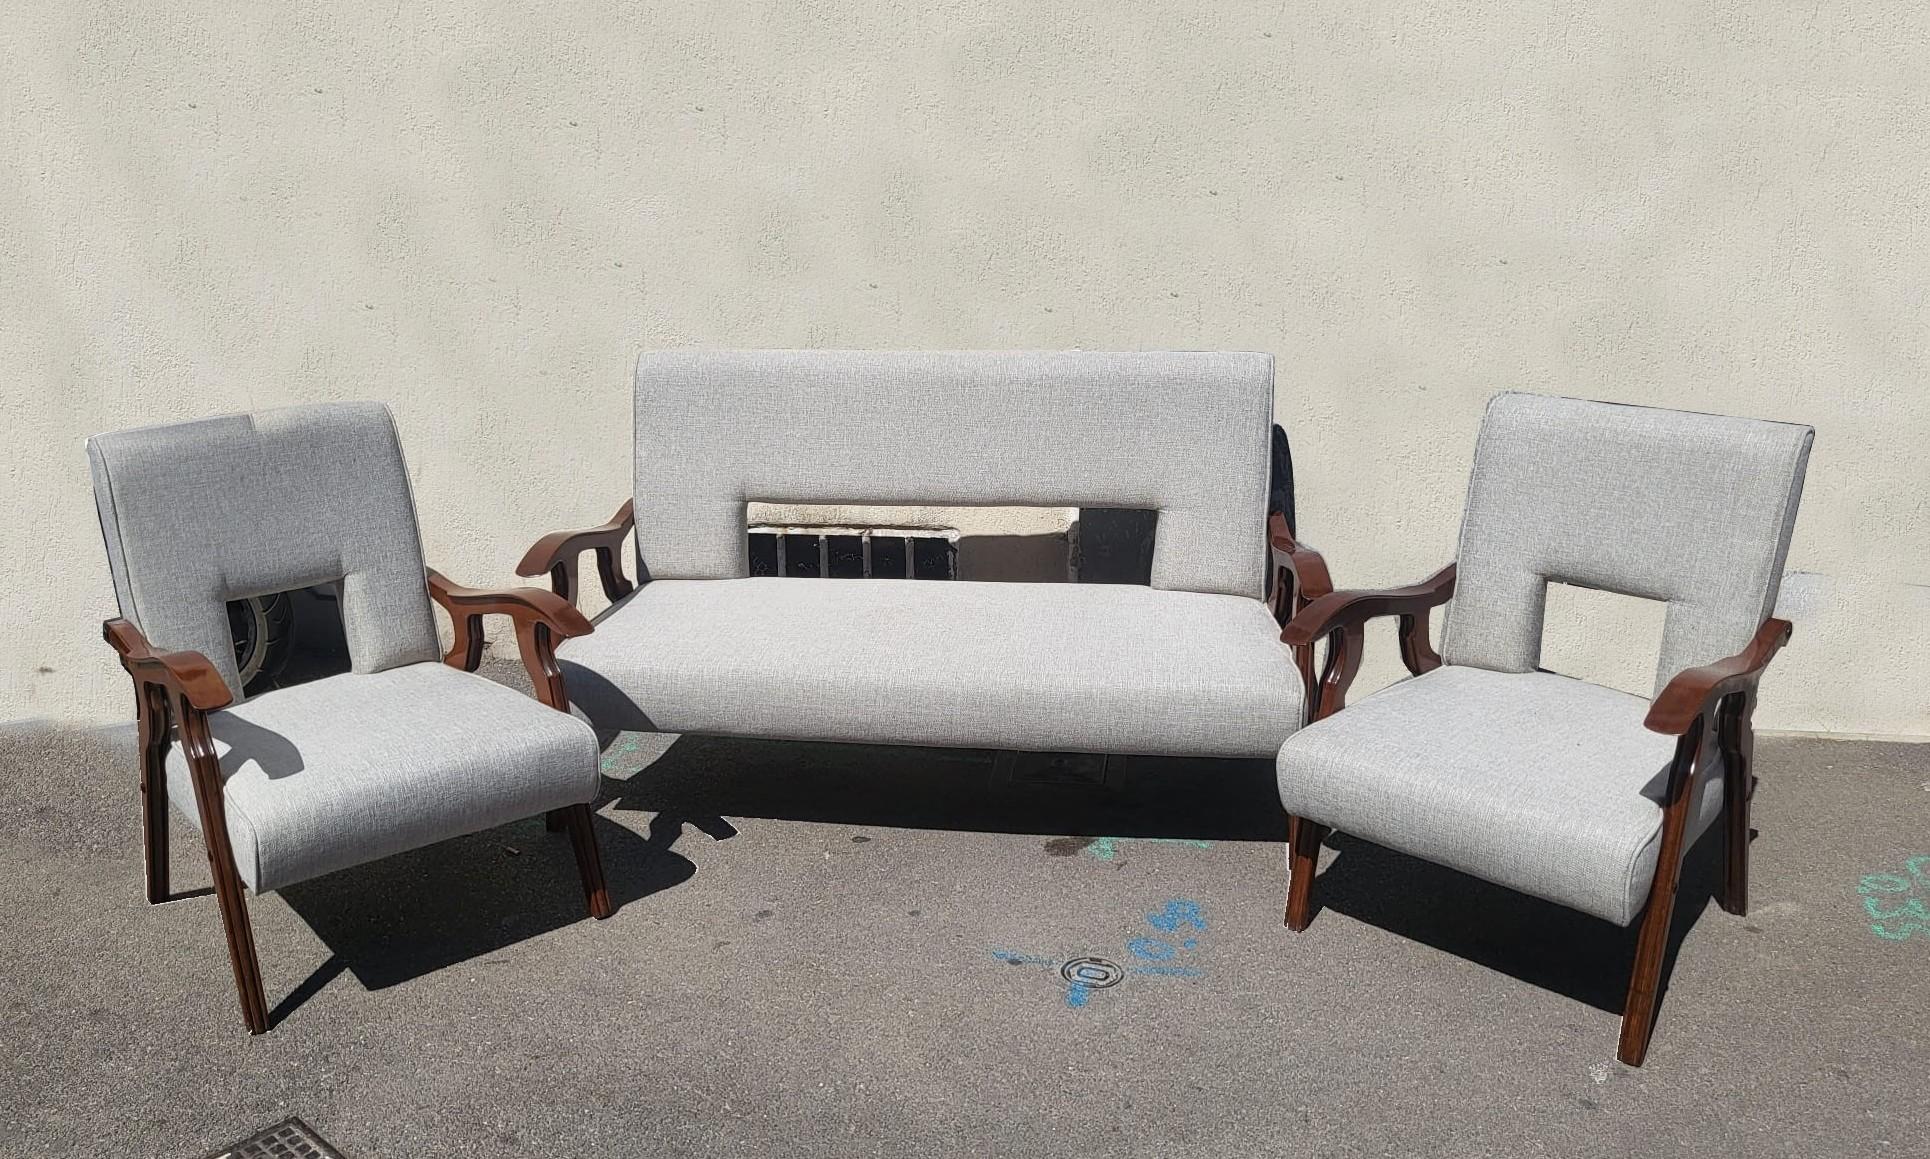 Living Room set 1 Sofa + 2 Armchairs, Design From The 70s, 20th Century For Sale 1